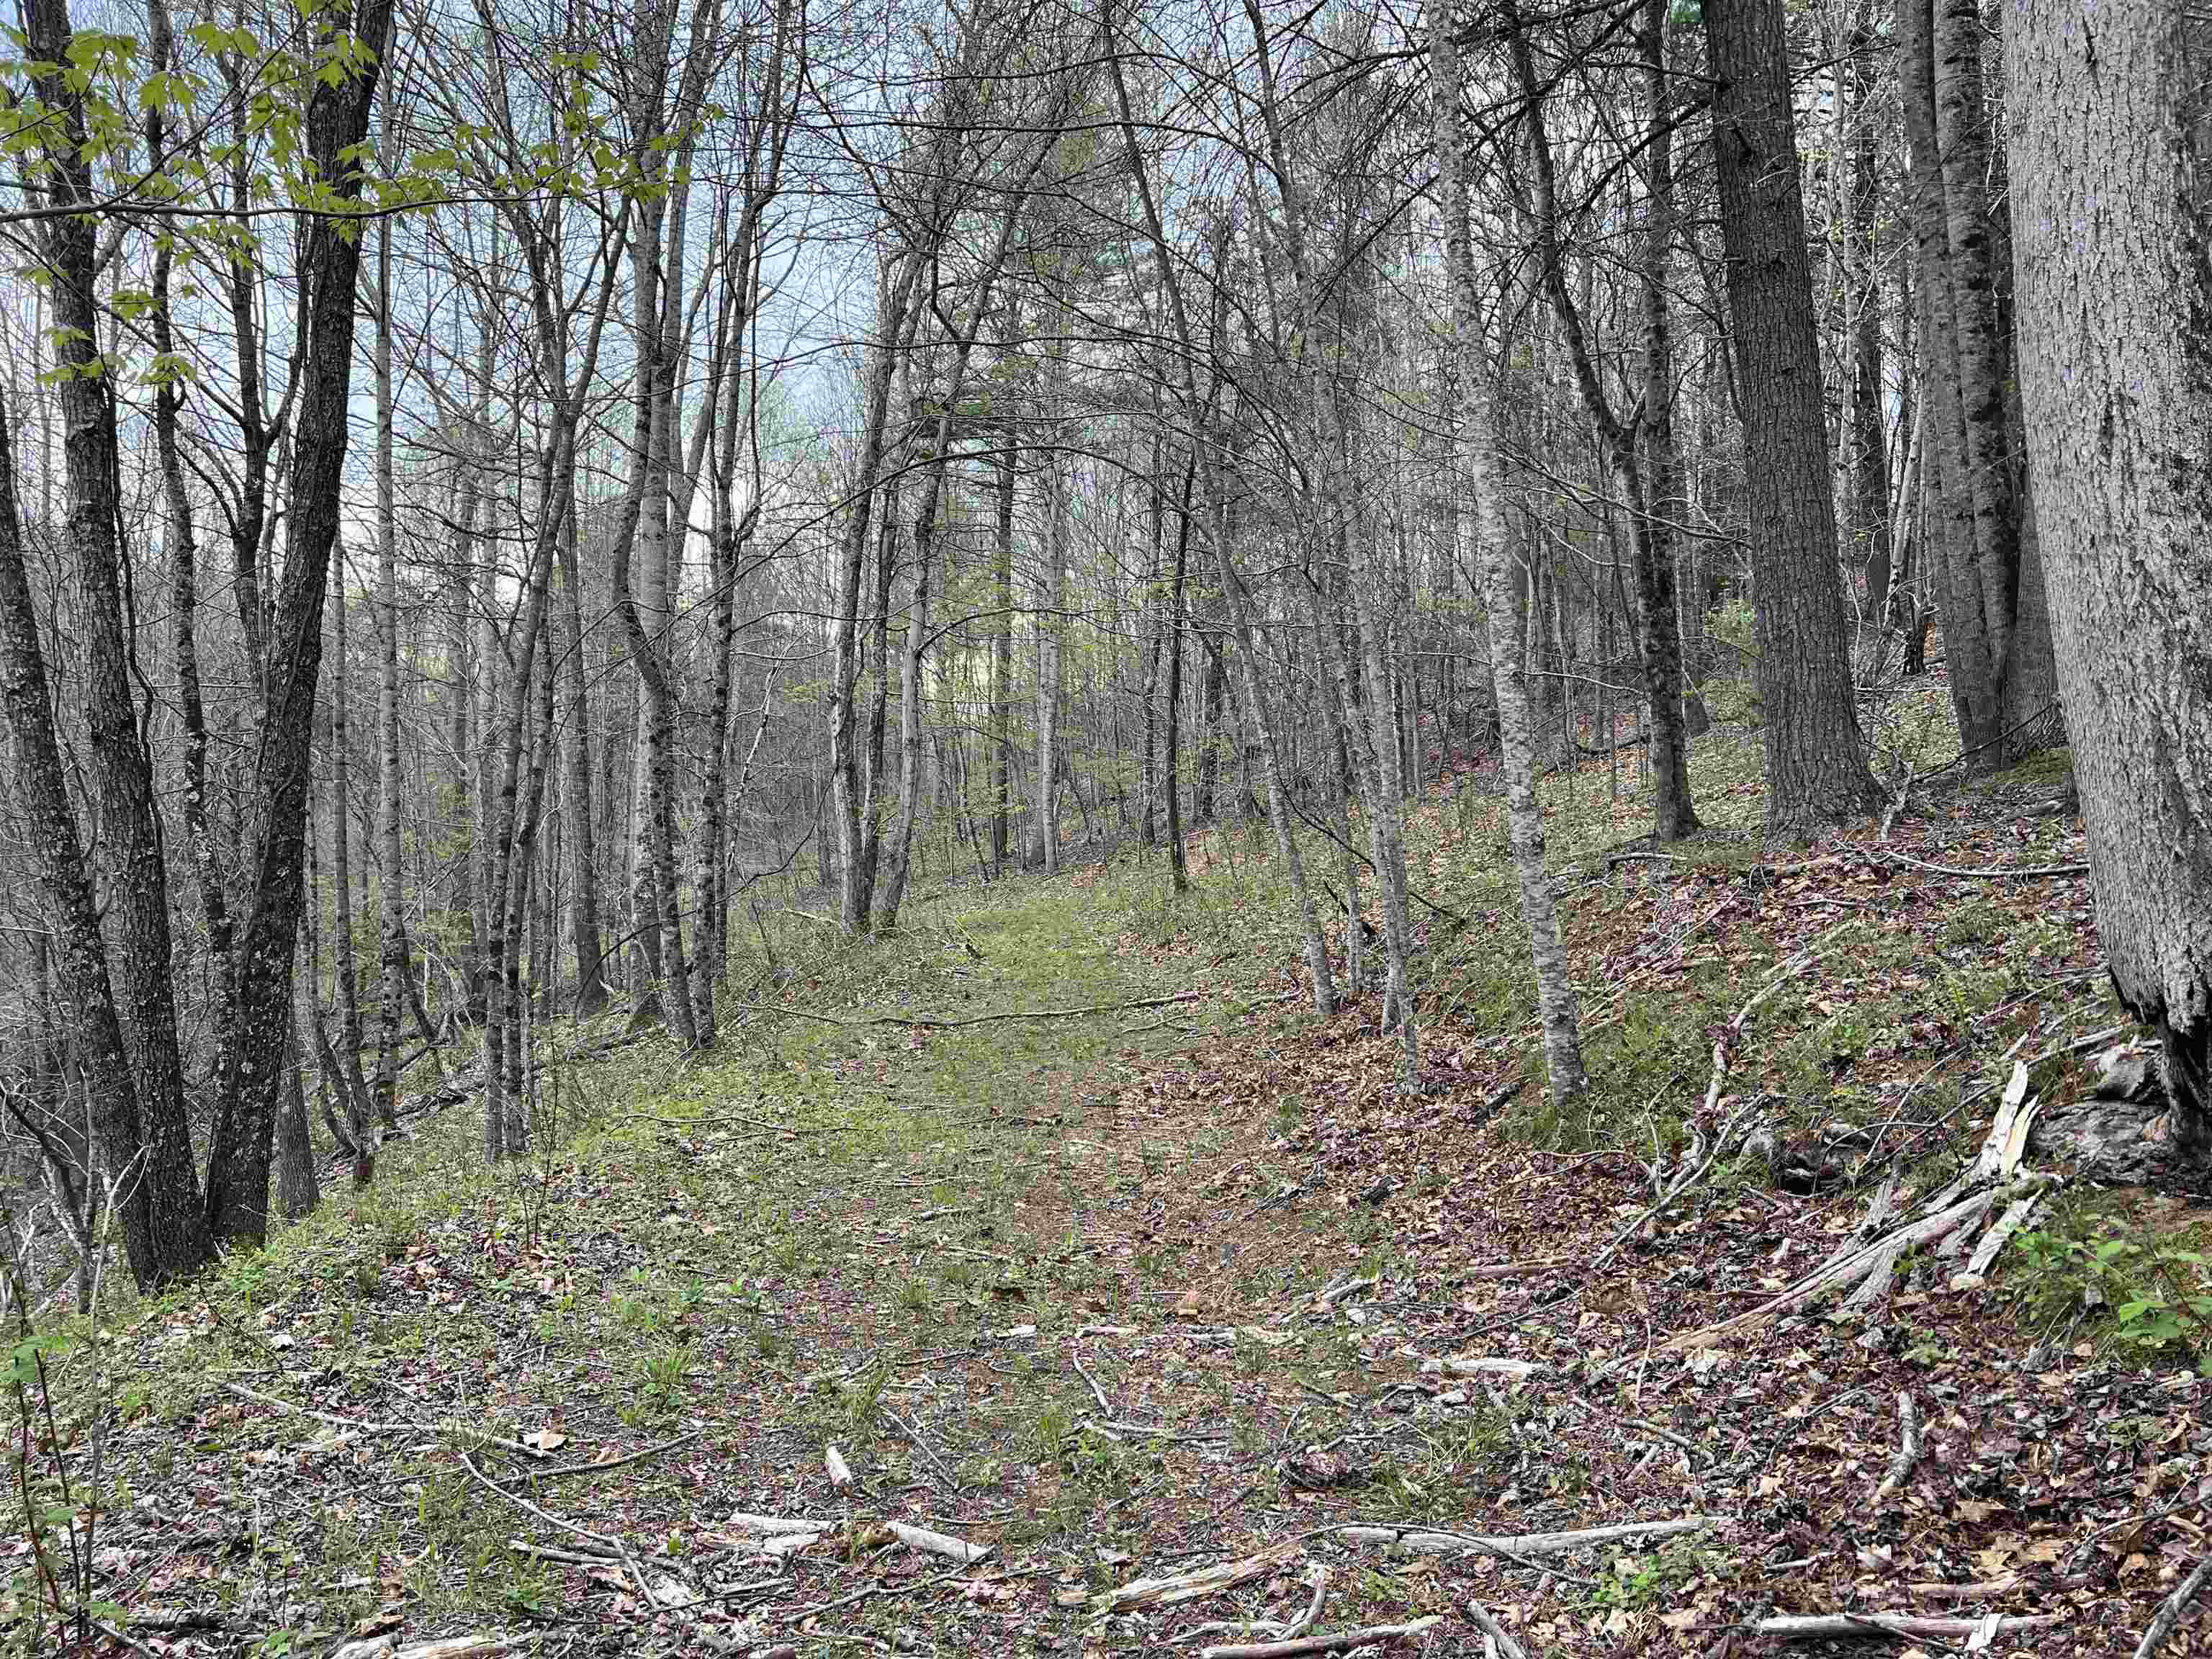 Beautiful 19+ acre tract in Floyd County.  Well maintained road. Mixture of hard woods and pine. Many building sites and lots of potential. Perfect for your dream home, recreational property, and plenty of wildlife for hunting. Please DO NOT enter without permission. Little River crossing is a private road. Please call listing agent for permission, instructions and restrictions.